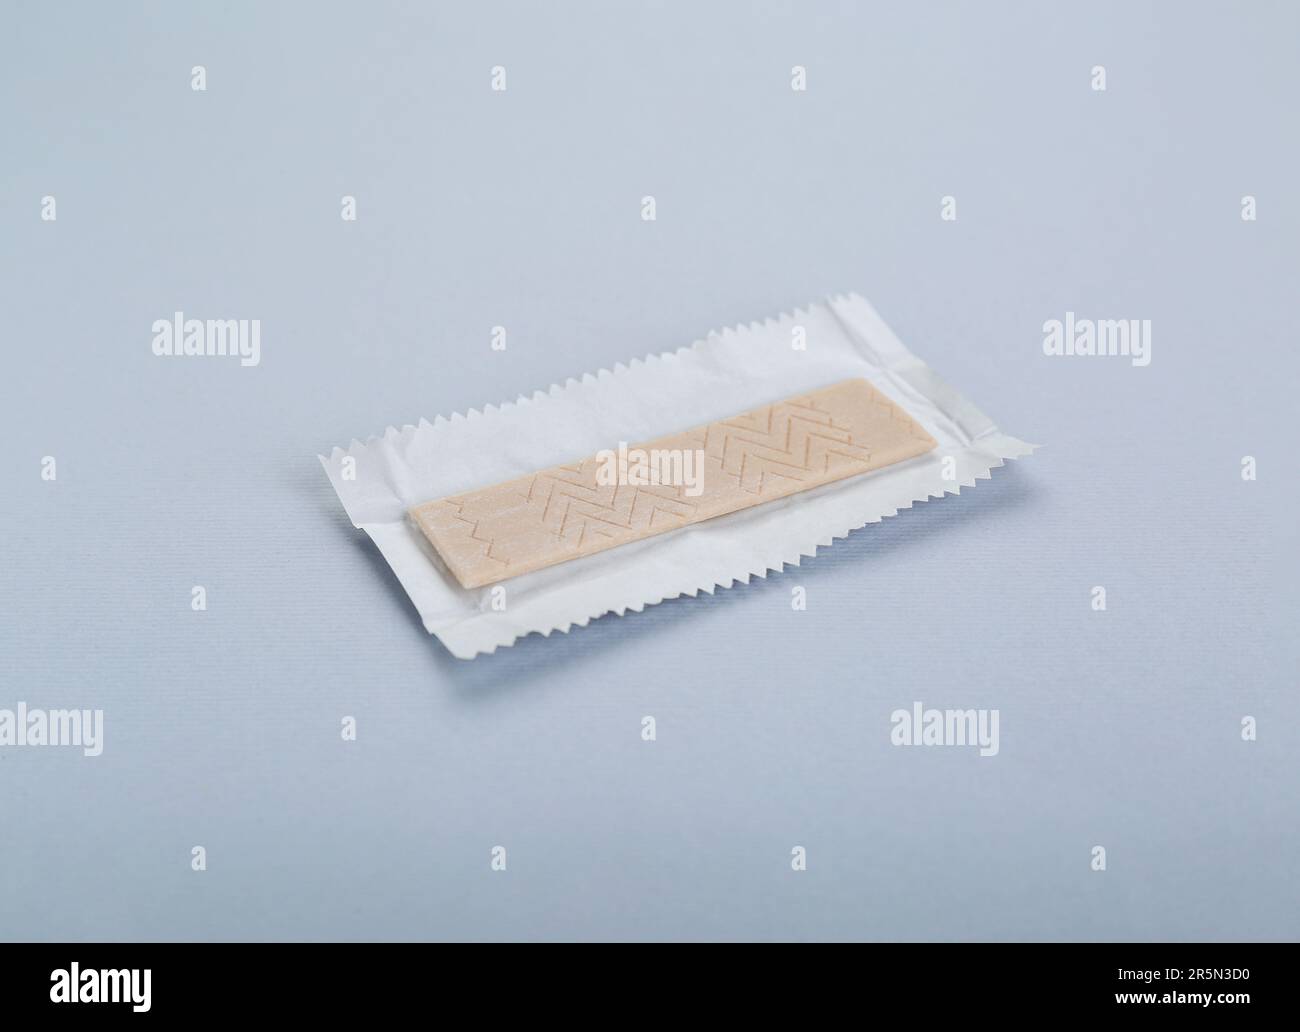 Unwrapped stick of chewing gum on light grey background Stock Photo